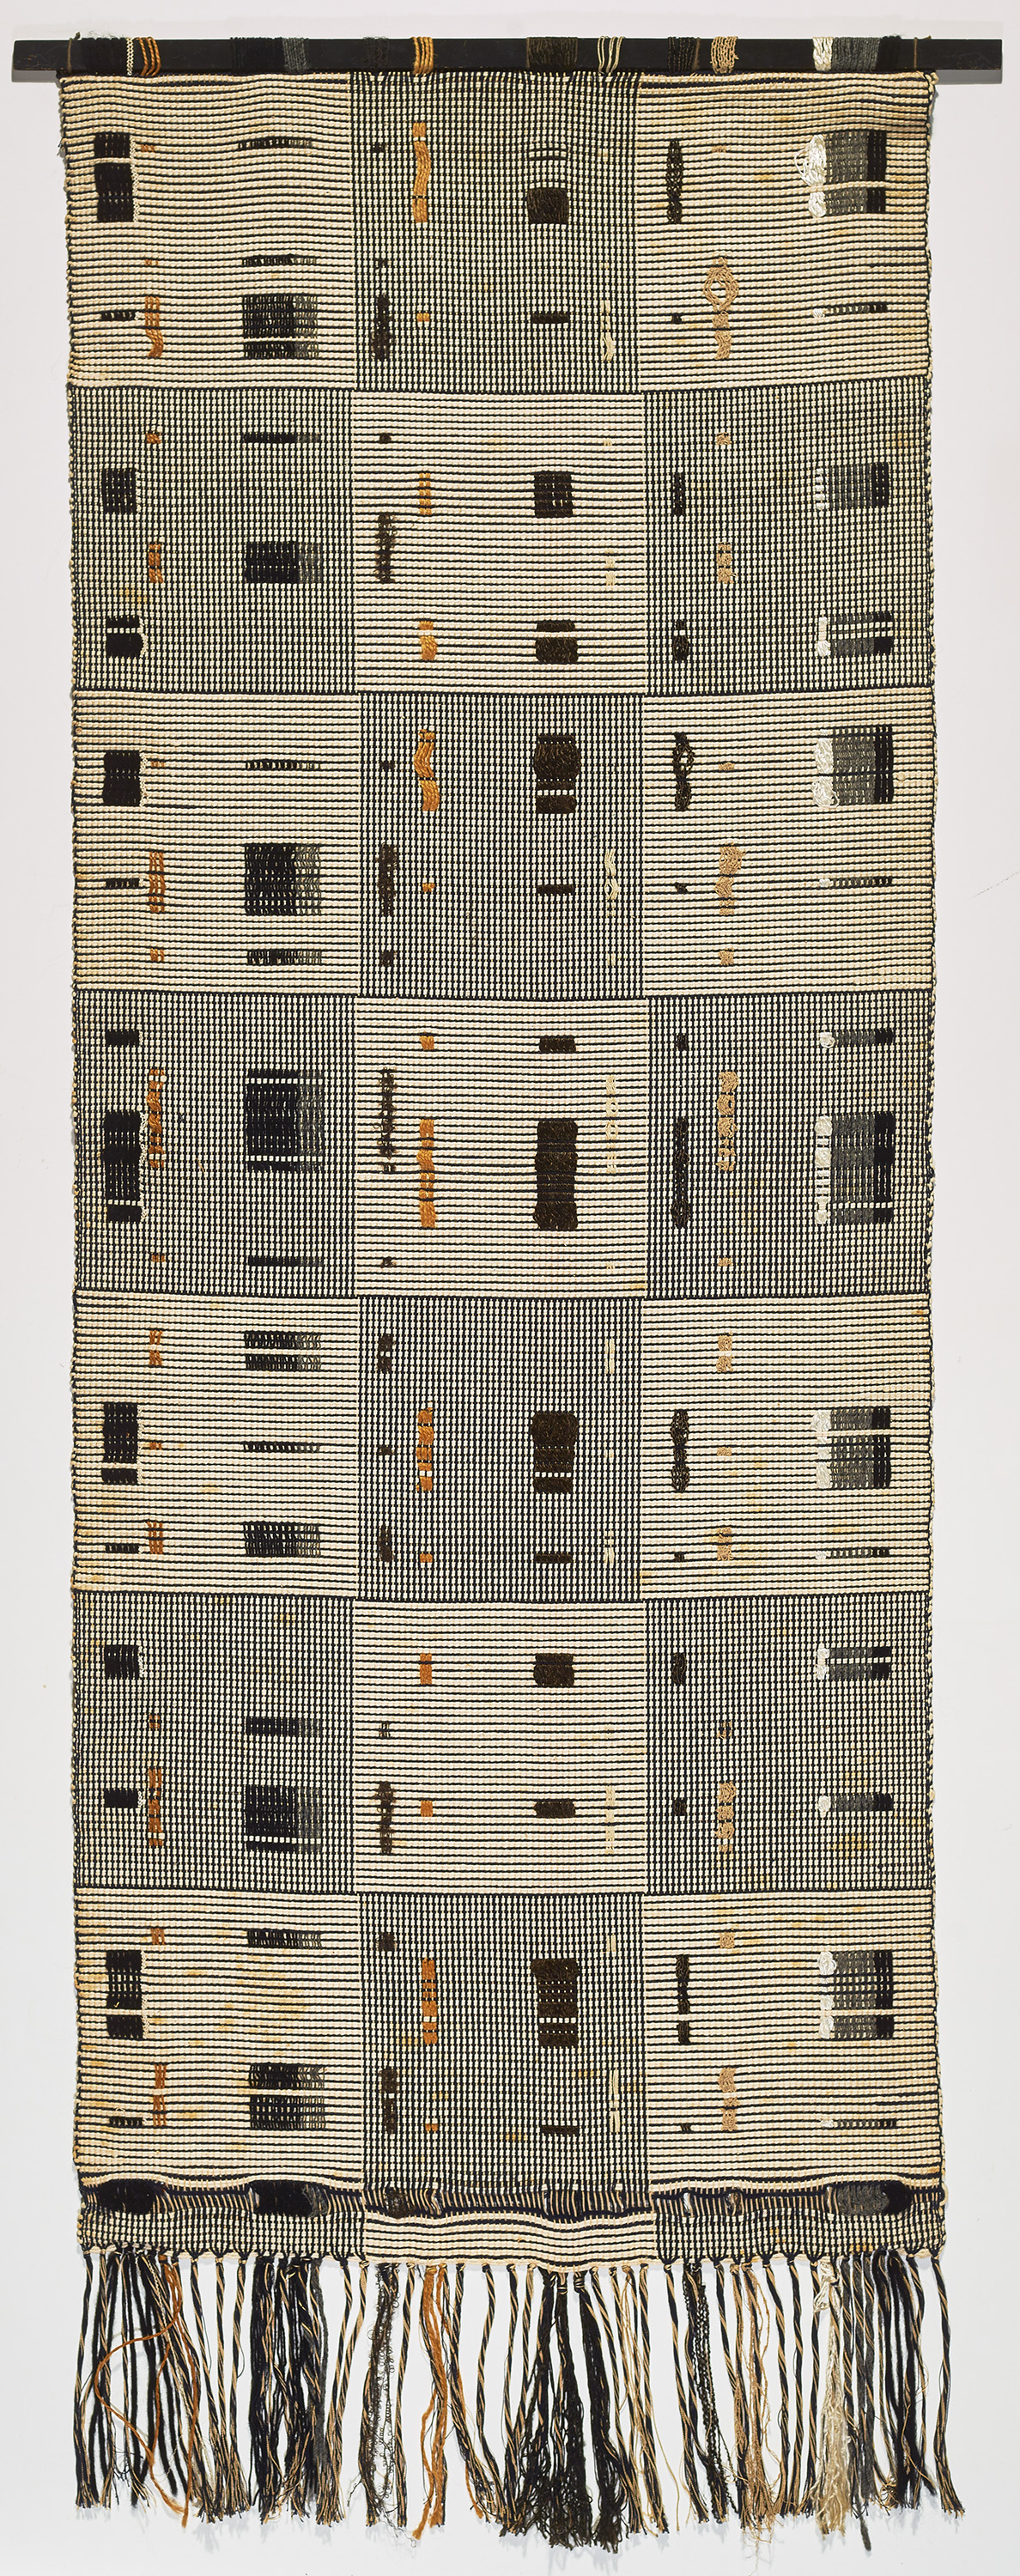 Kay Sekimachi, Wall Hanging, 1959, cotton, rayon, wool, jute, wood, Los Angeles County Museum of Art, gift of Margaret and Joel Chen through the 2020 Decorative Arts and Design Acquisitions Committee (DA²) in memory of Peter Loughrey, © Kay Sekimachi, photo by Lee Fatherree